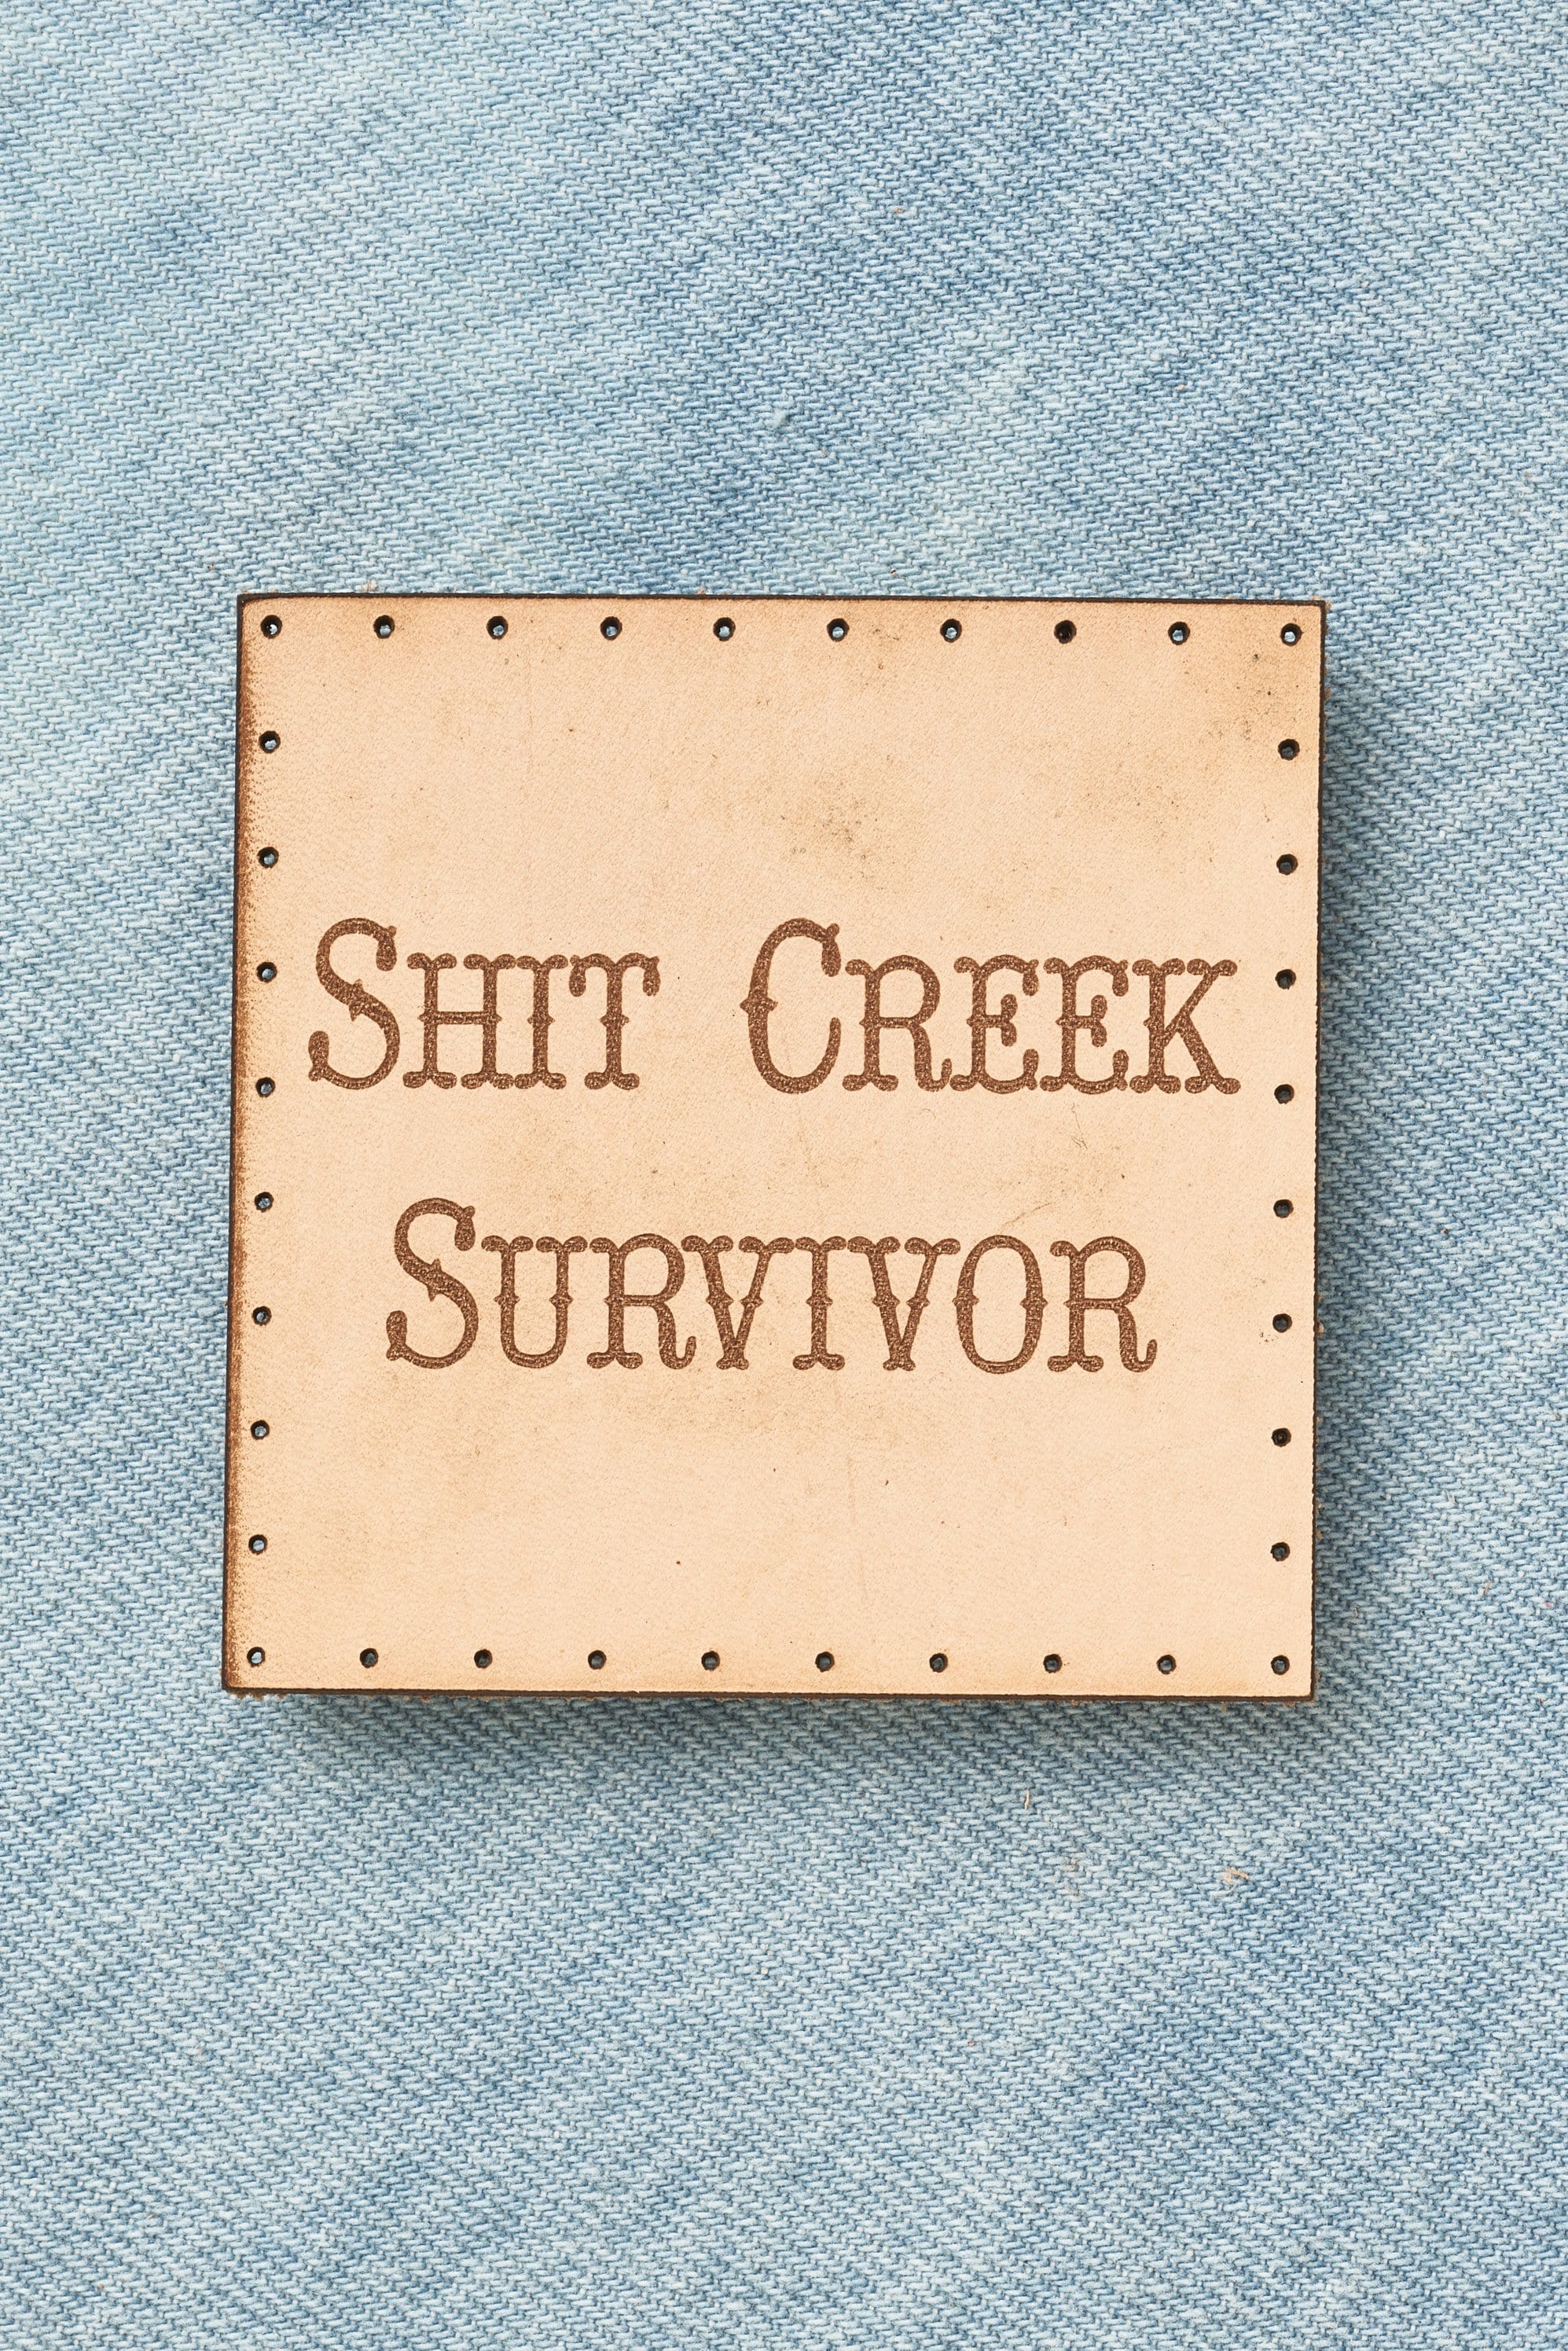 Funny Embroidered Patch, Shit Creek Survivor Patch